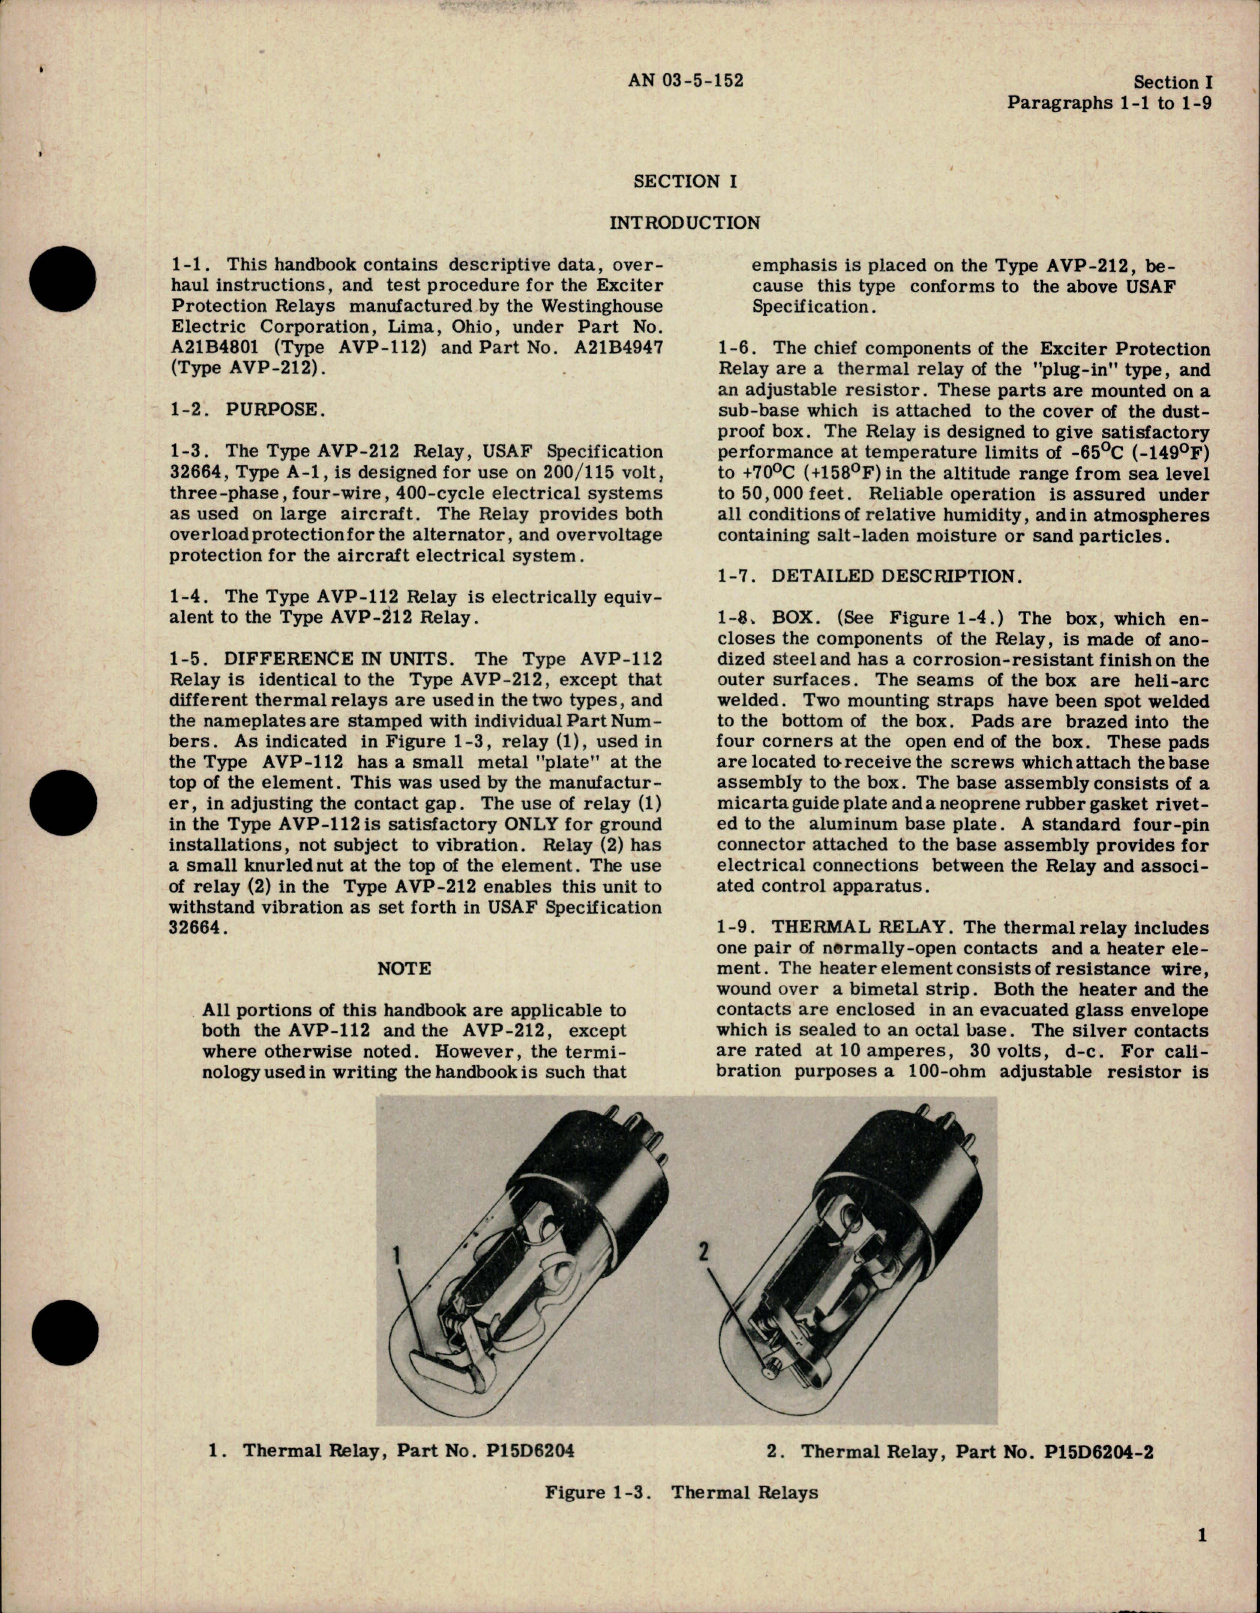 Sample page 5 from AirCorps Library document: Overhaul Instructions for Exciter Protection Relays - Parts A21B4801 and A21B4947 